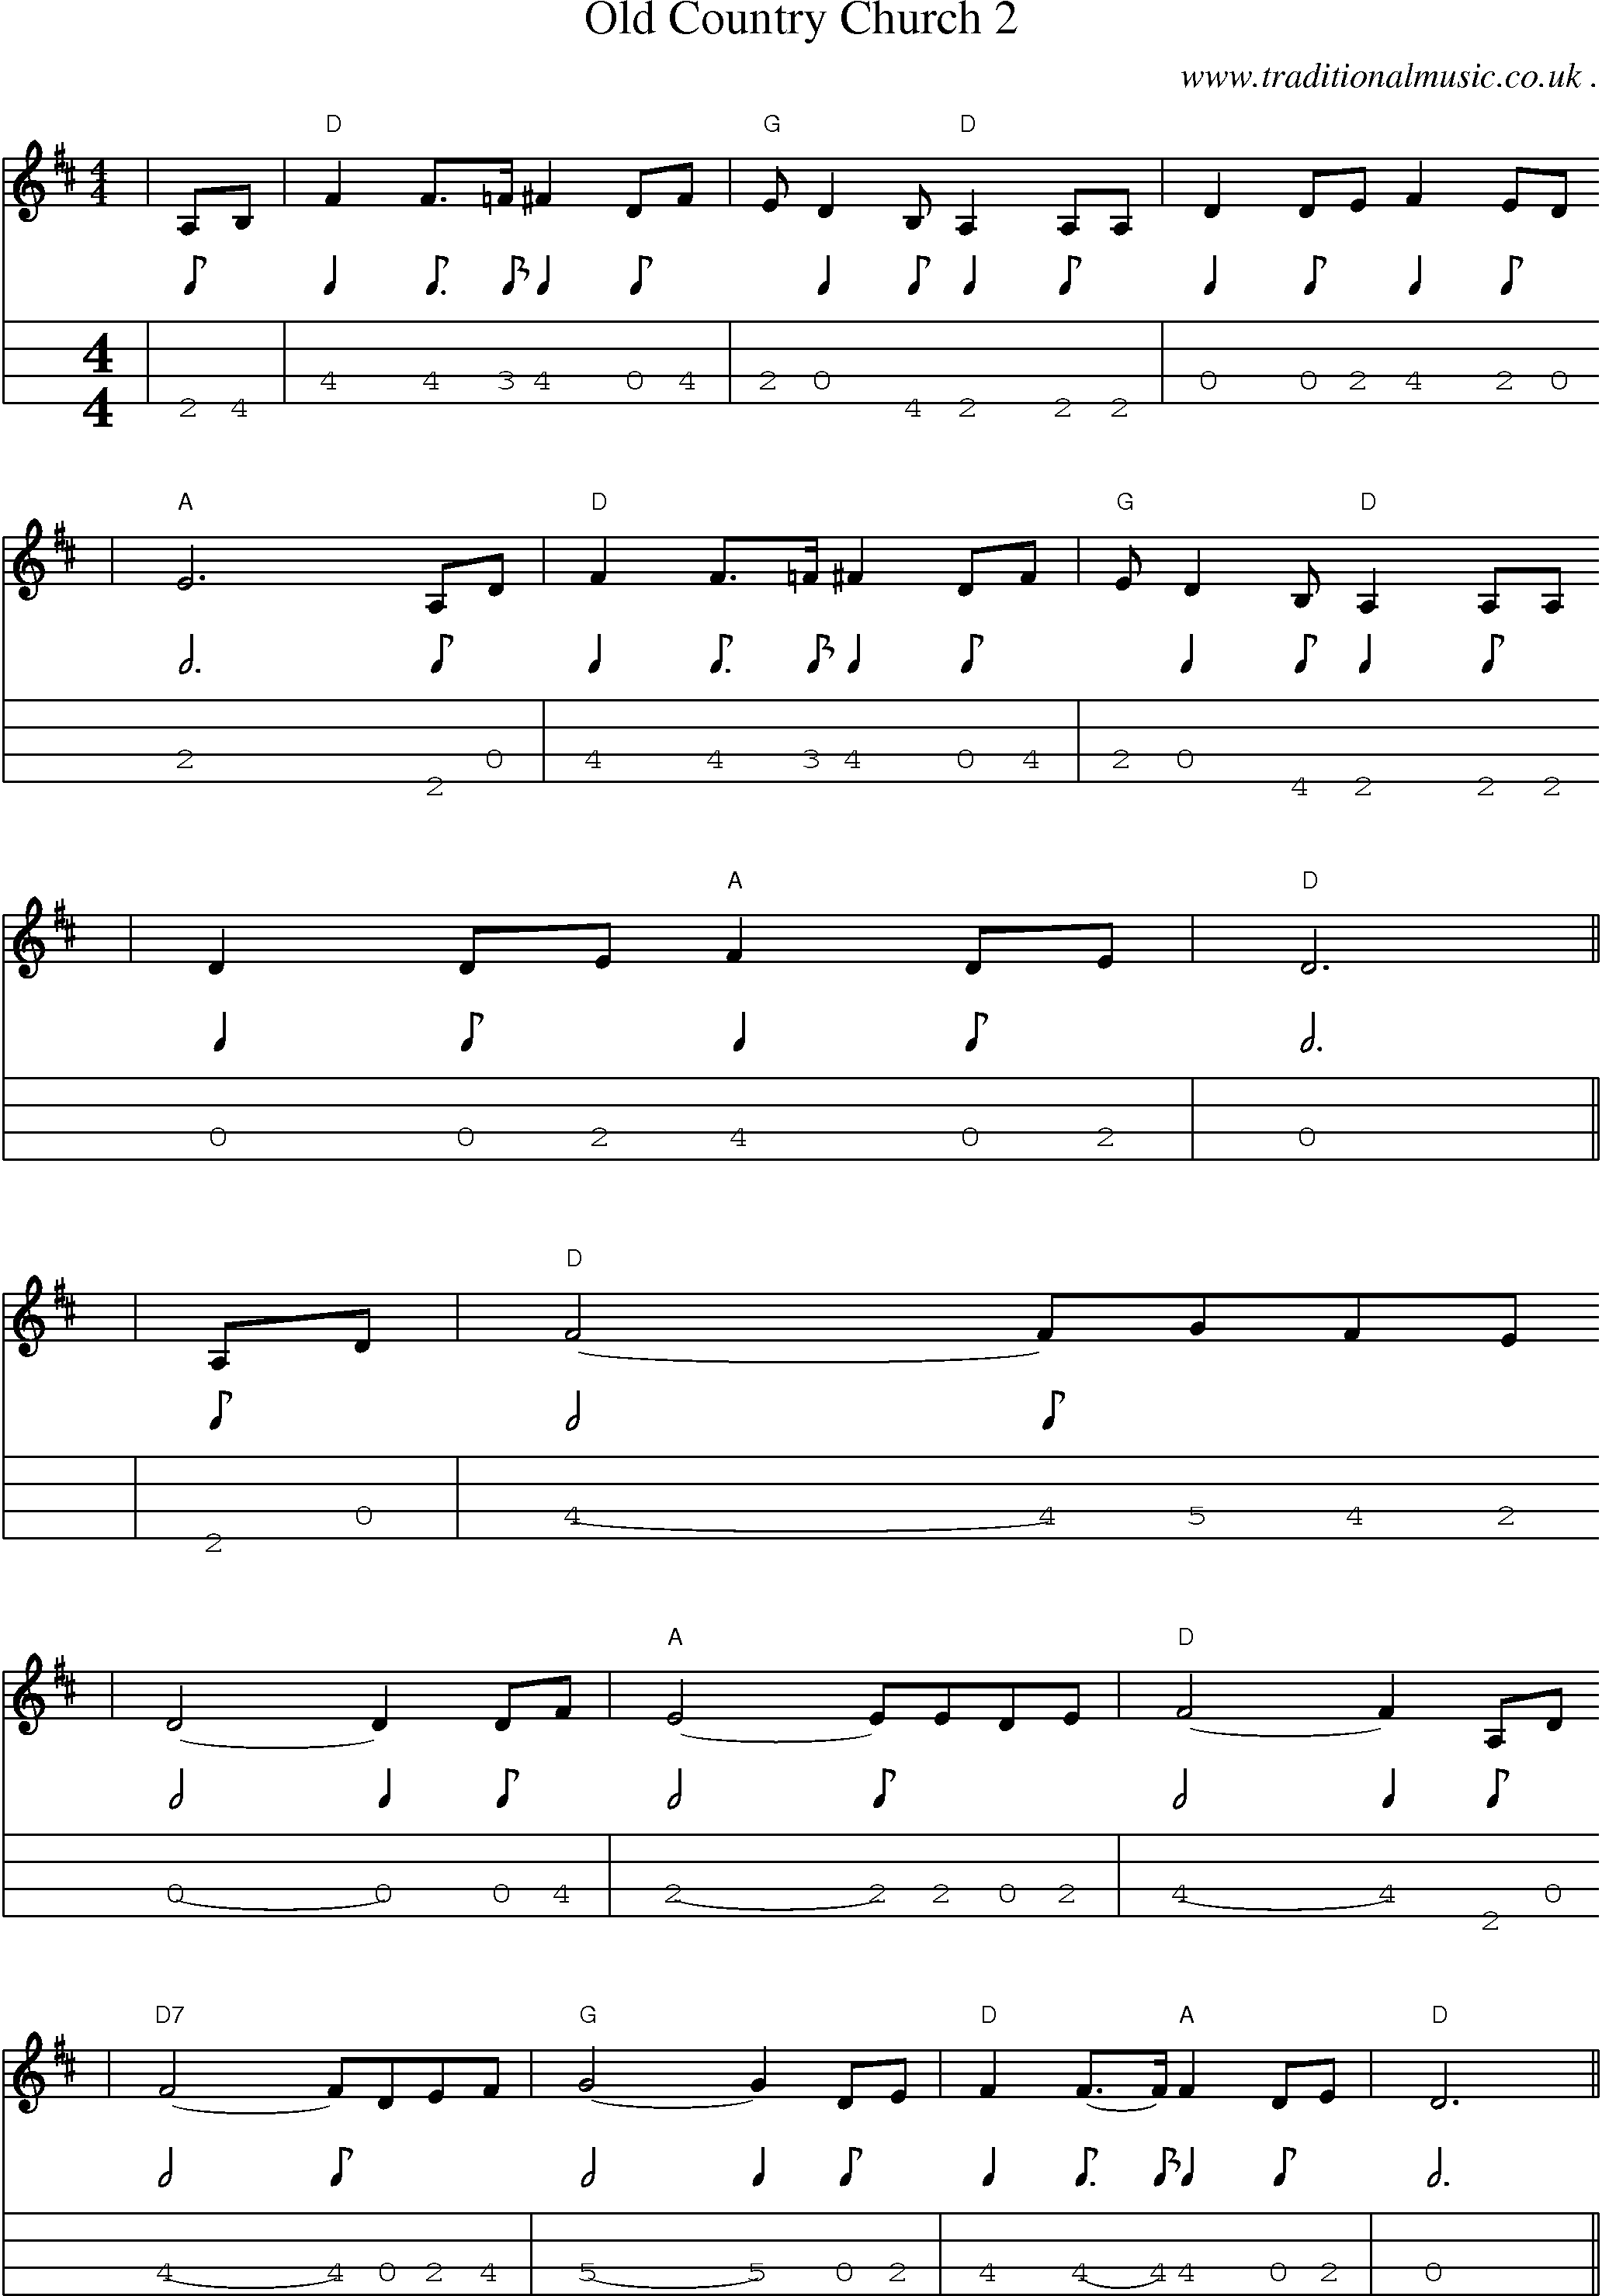 Music Score and Mandolin Tabs for Old Country Church 2